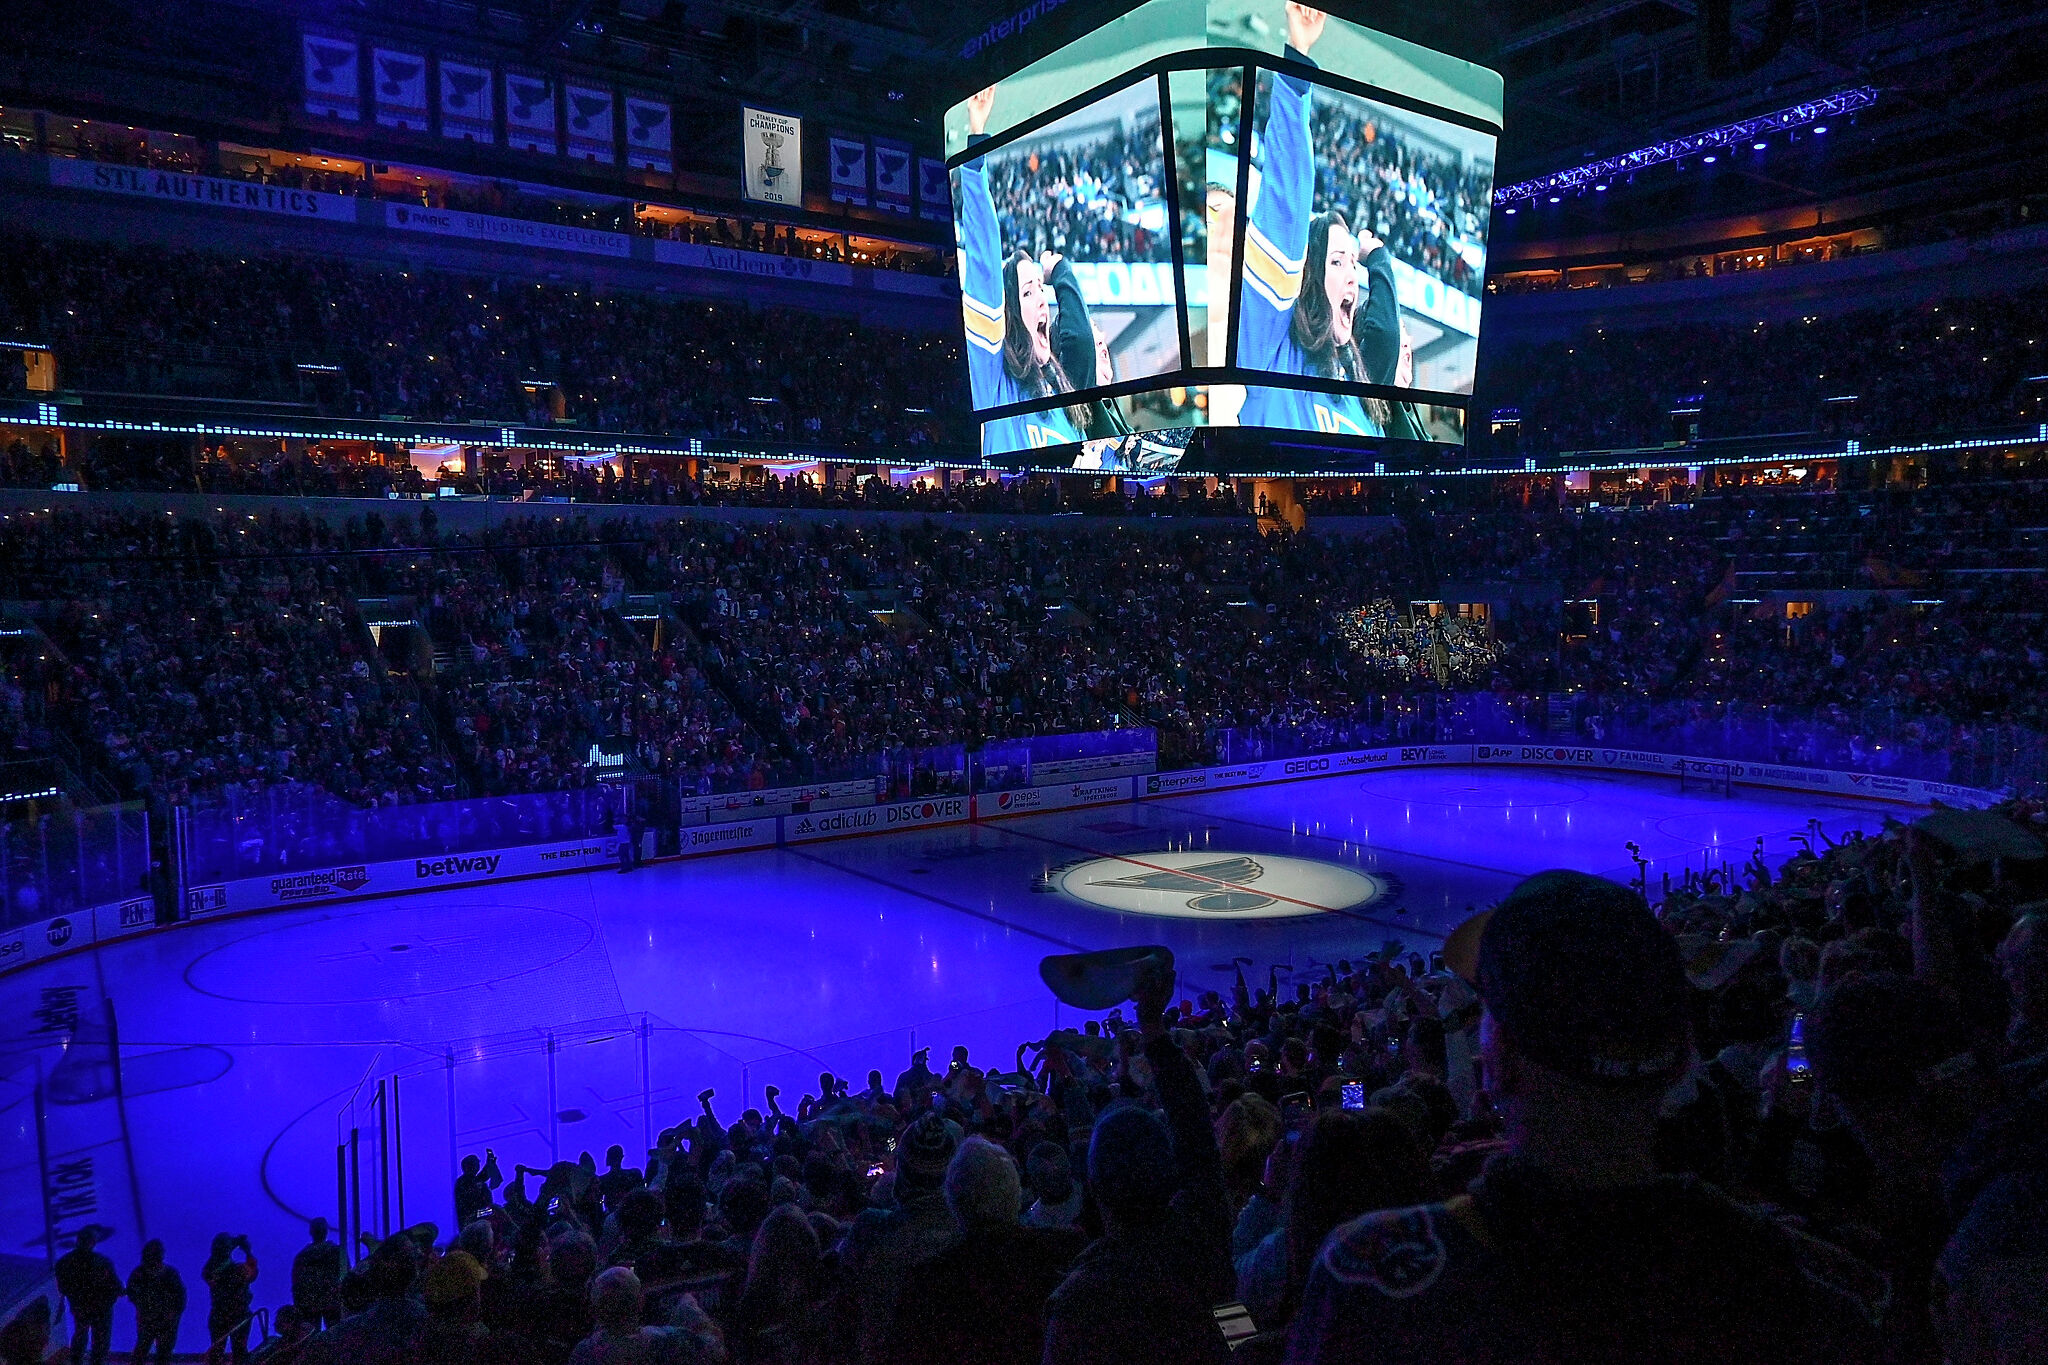 St. Louis Blues - St. Louis Blues updated their cover photo.